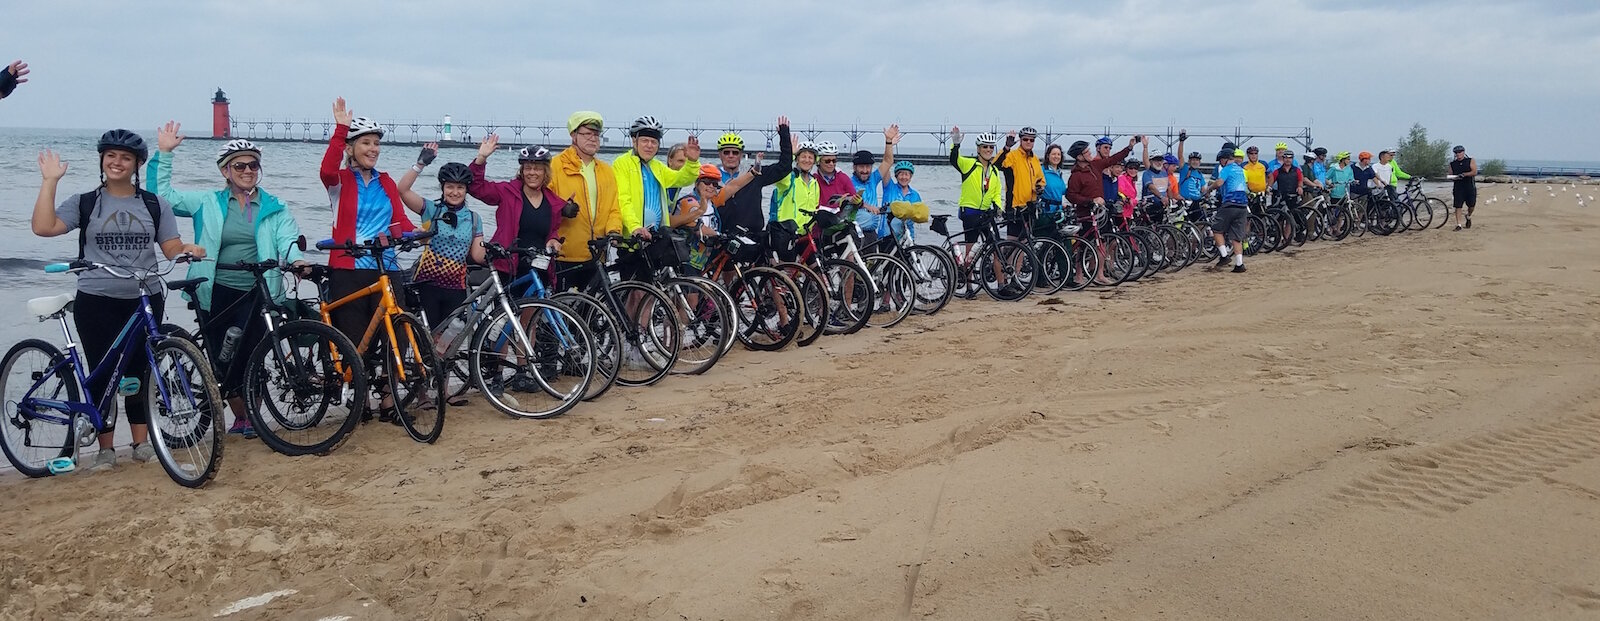 Riders dip their back tire in Lake Michigan before taking off for Lake Huron